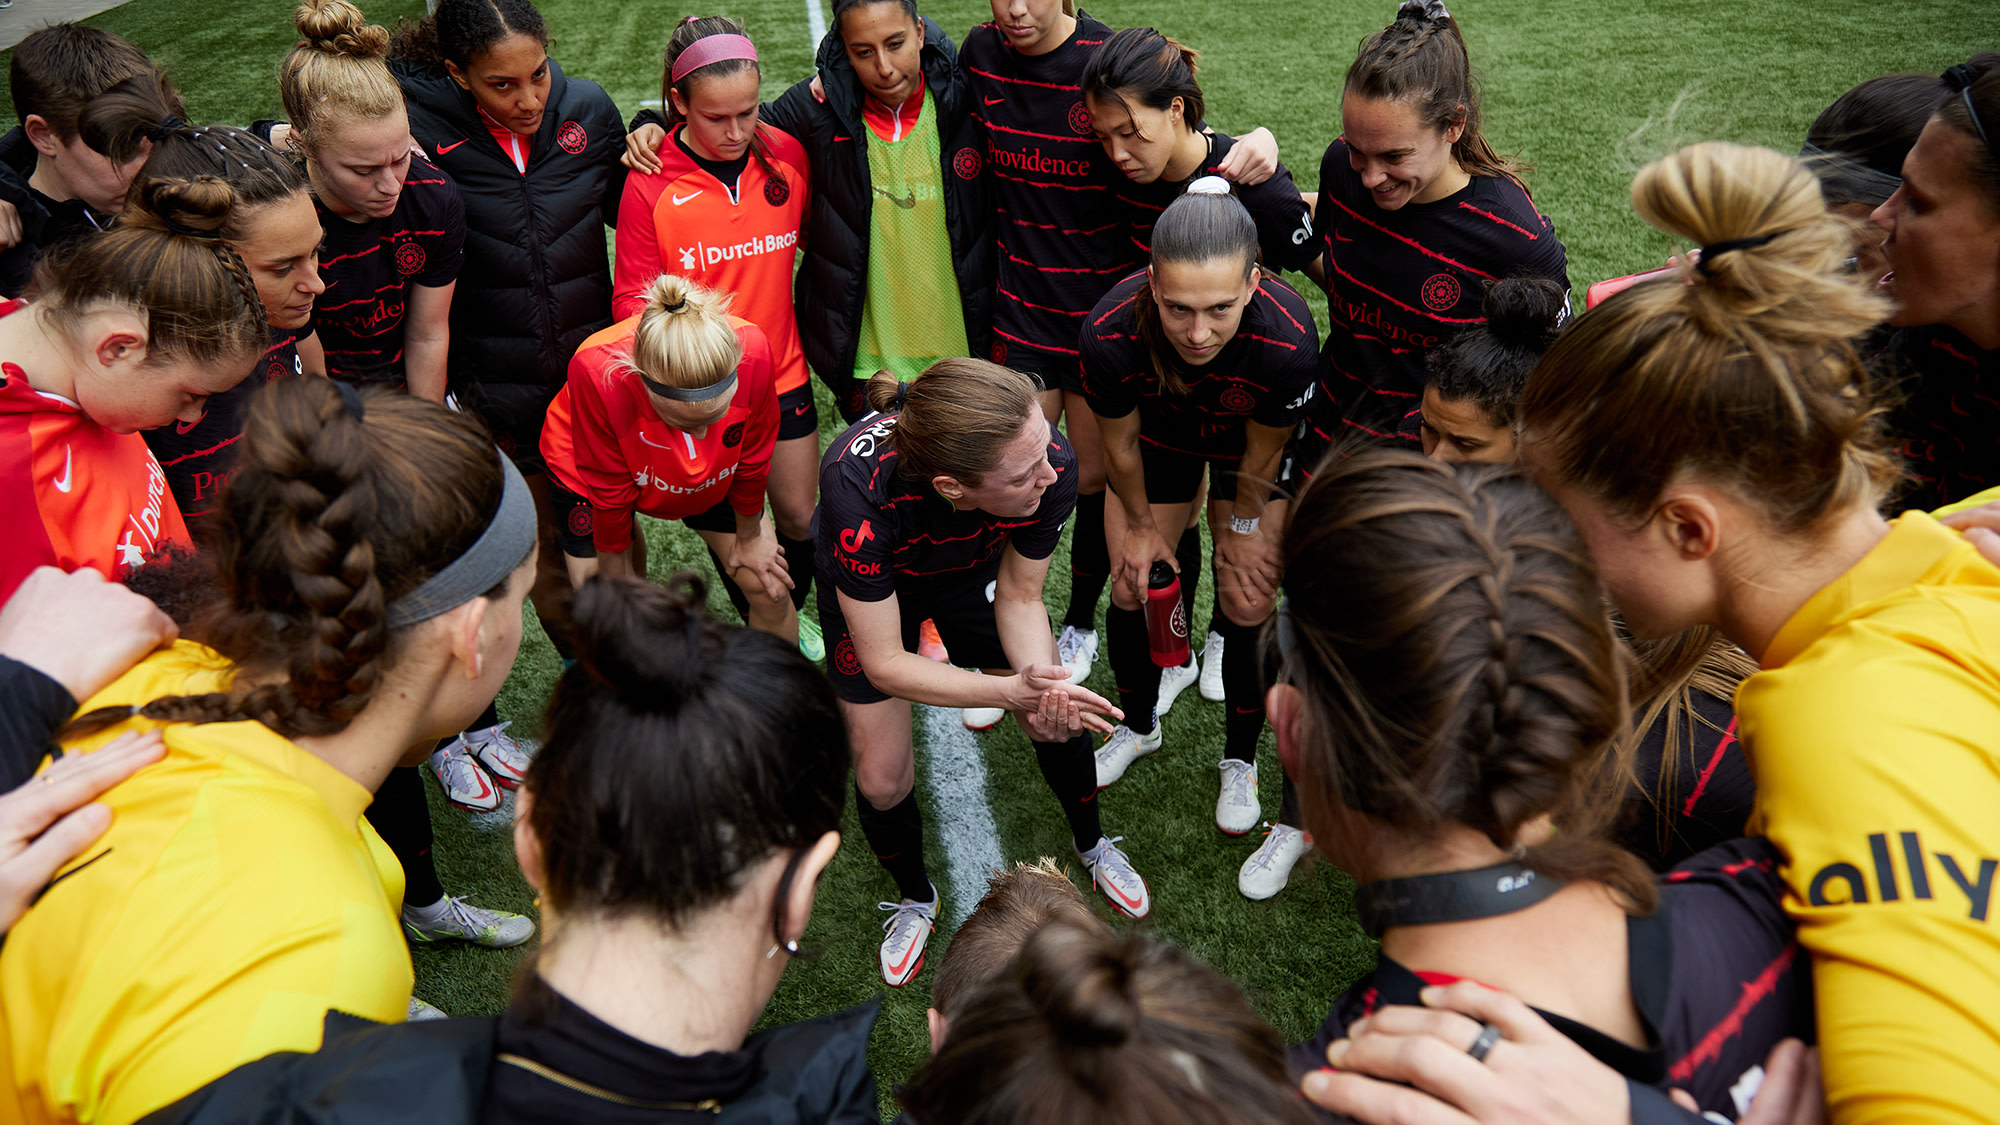 Four things worth noting as Thorns transition from Challenge Cup to NWSL regular season